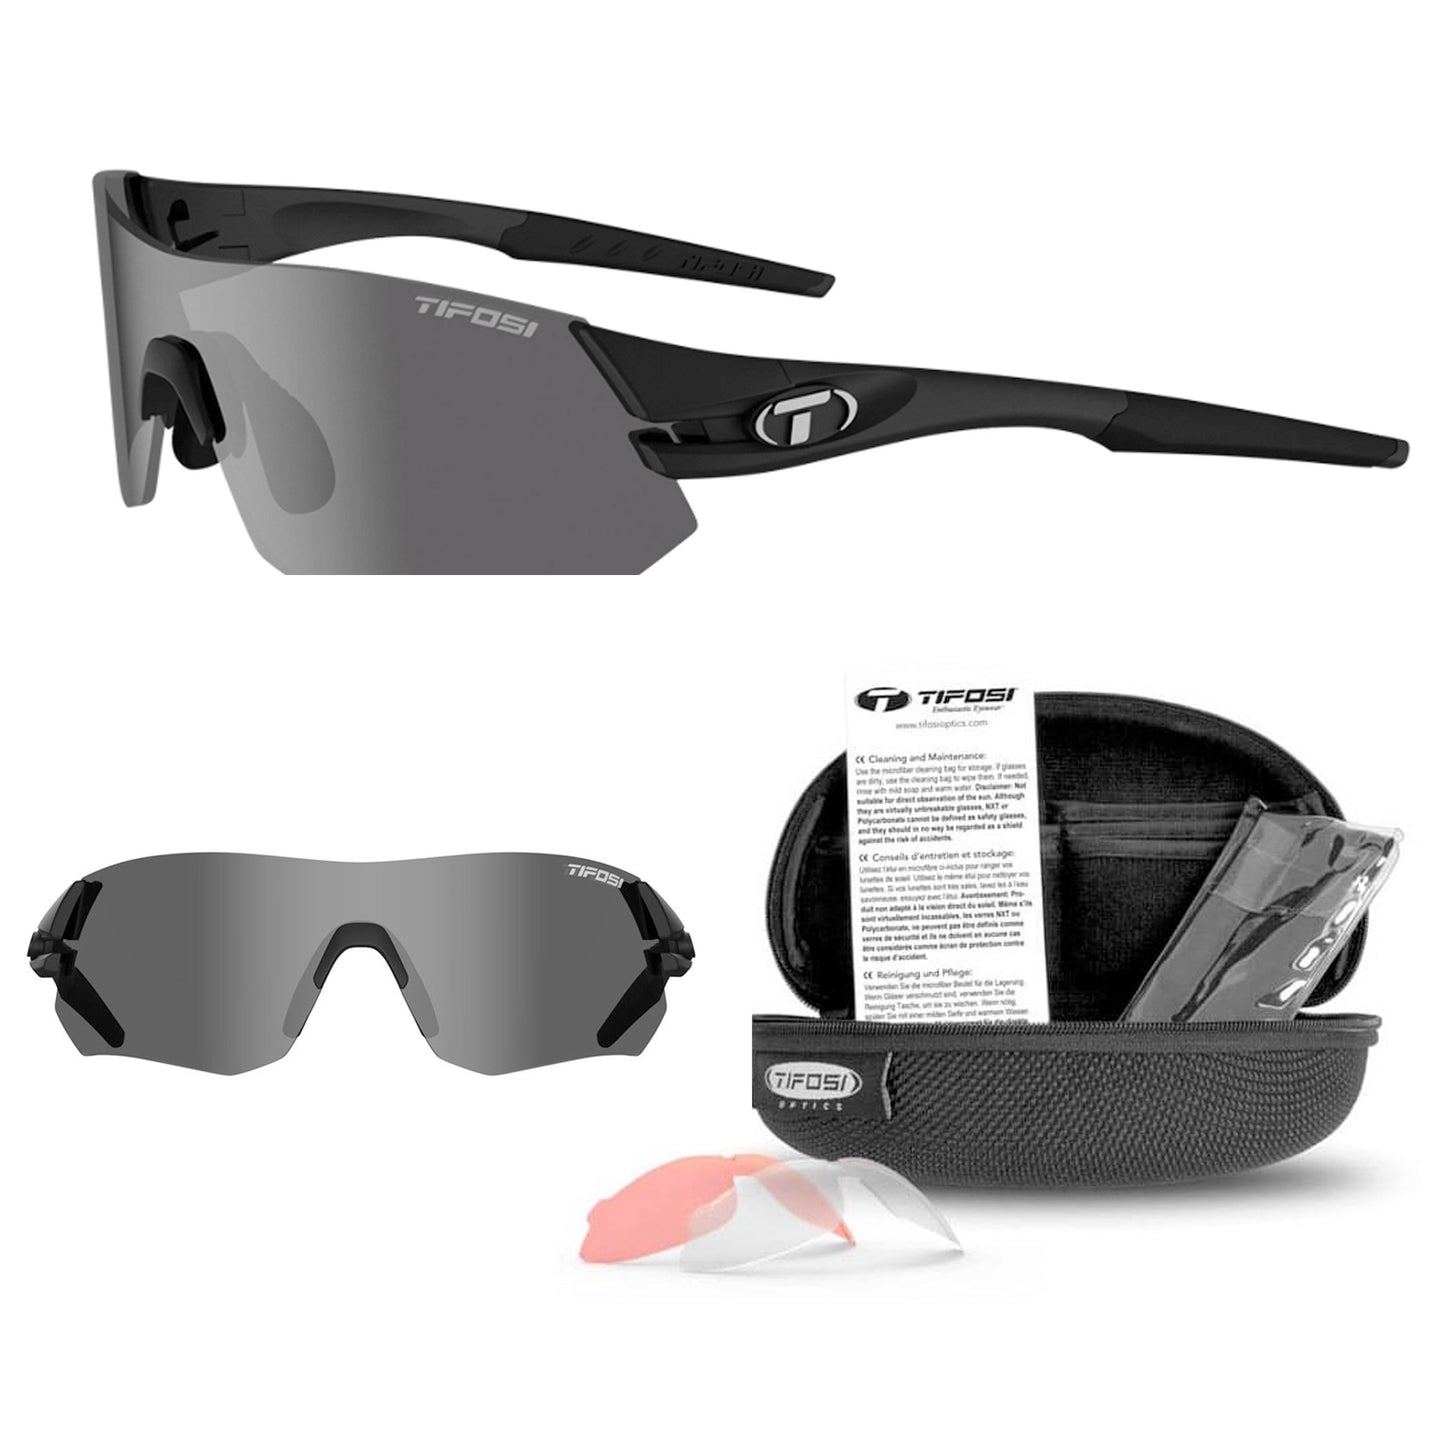 Tifosi Tsali Cycling Sunglasses With Three Interchangeable Lenses - Matte Black , buy online at Woolys Wheels with free delivery